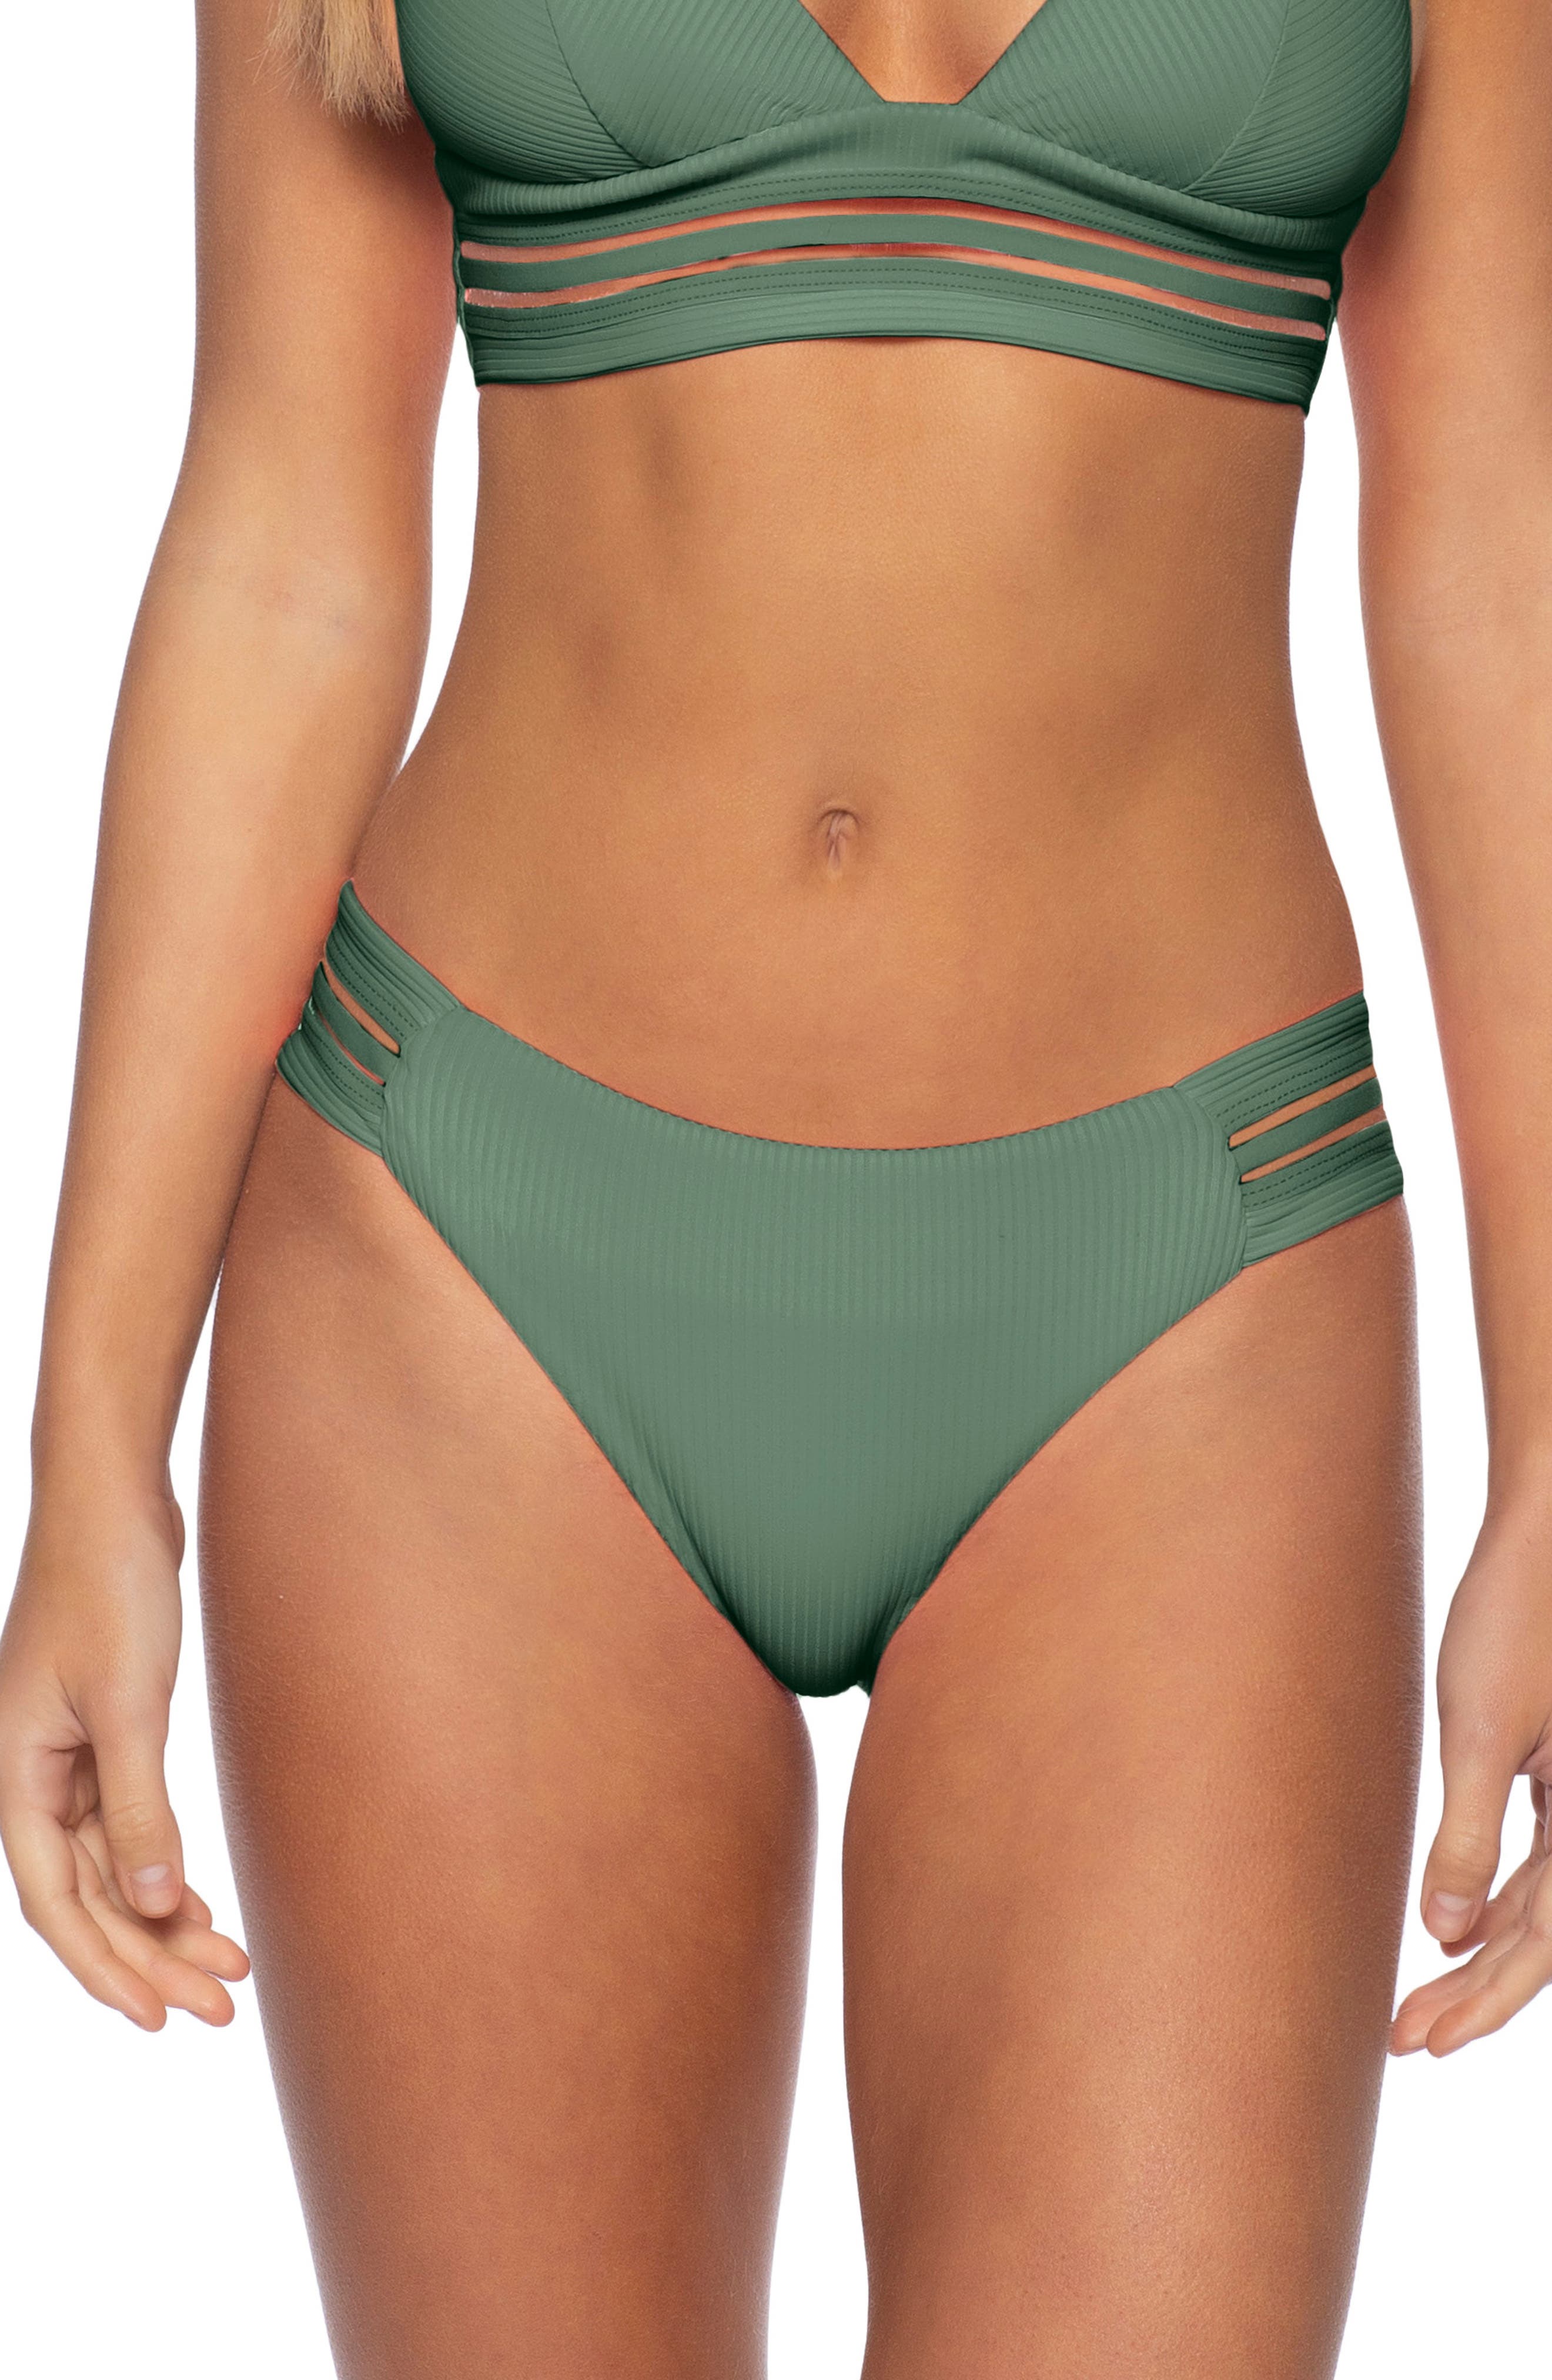 Tilbageholdenhed resultat Gå tilbage Women's Isabella Rose Miami Sugar On Top High Cut High Waist Bikini Bottoms  - Shop and save up to 70% at The Luxy Shop